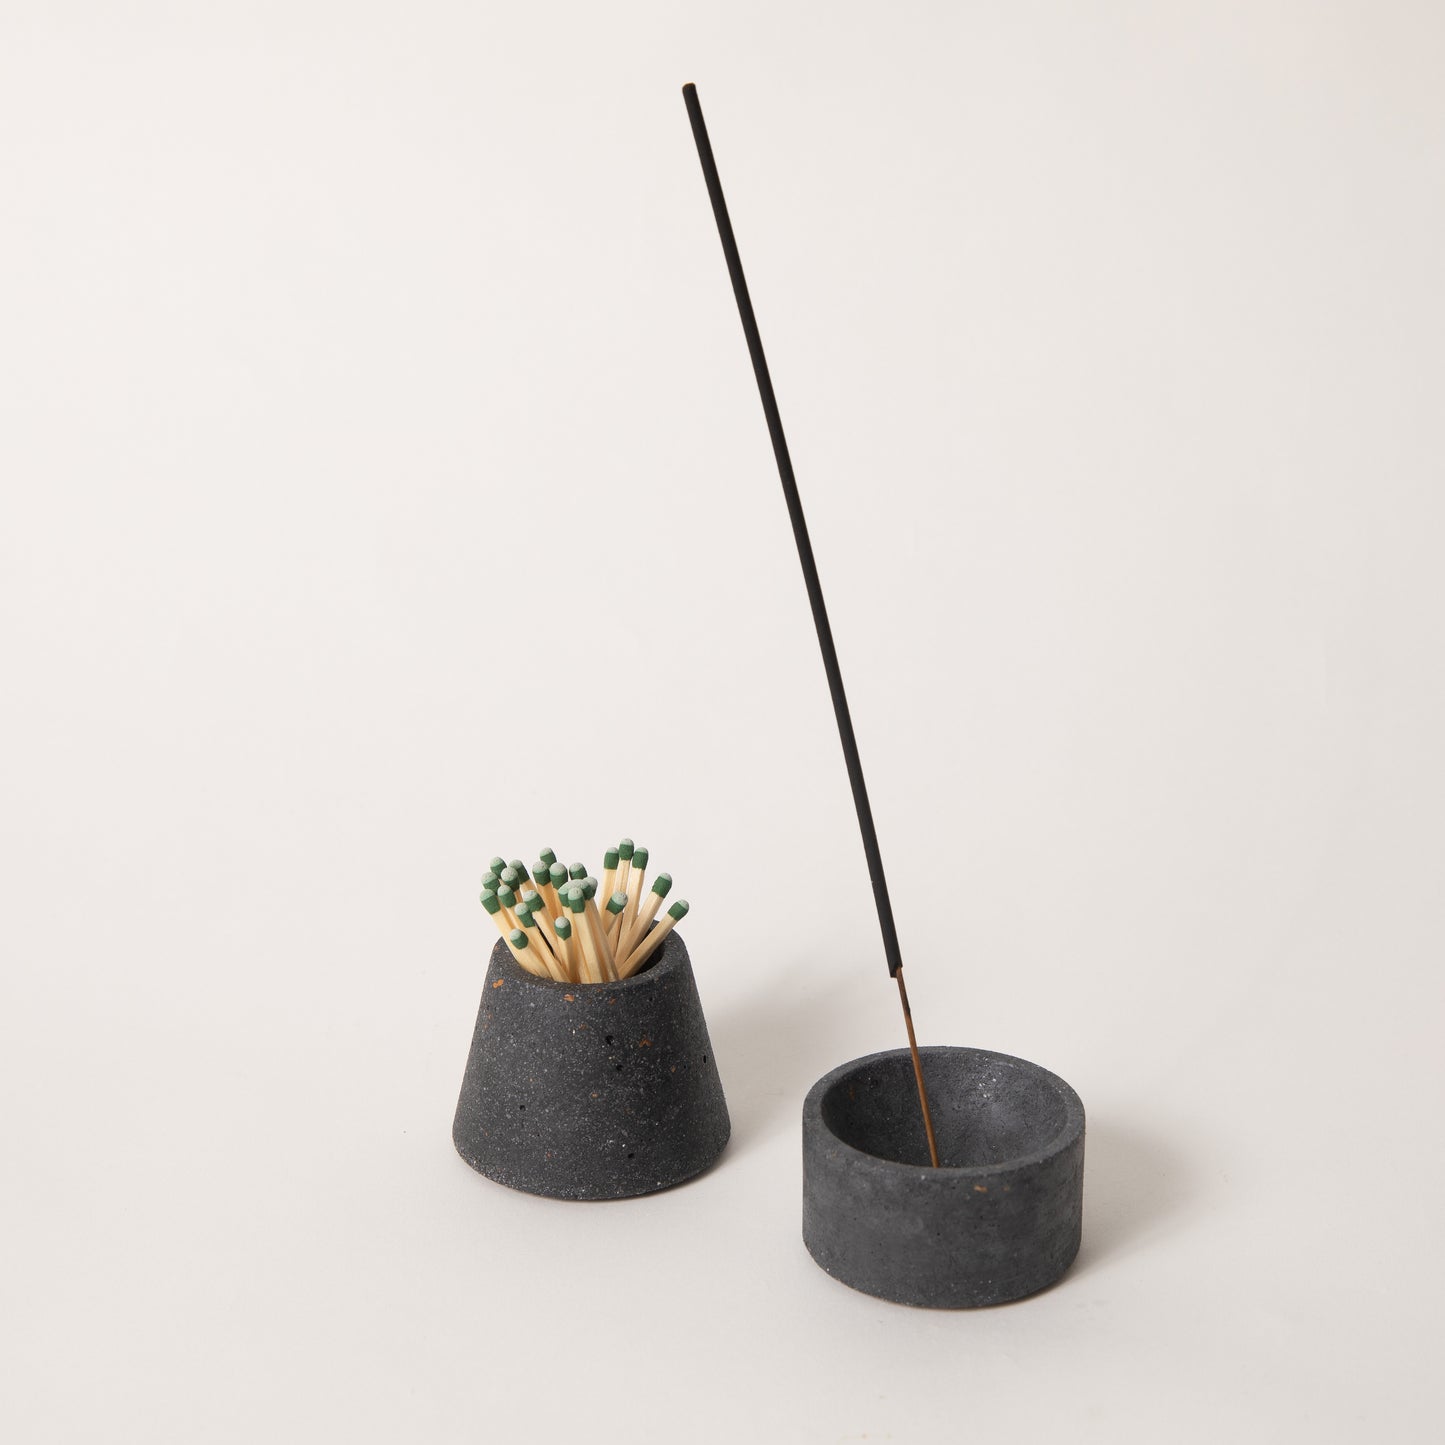 Black terrazzo matchstick & incense holder set, styled with strike-anywhere matches & an incense stick.